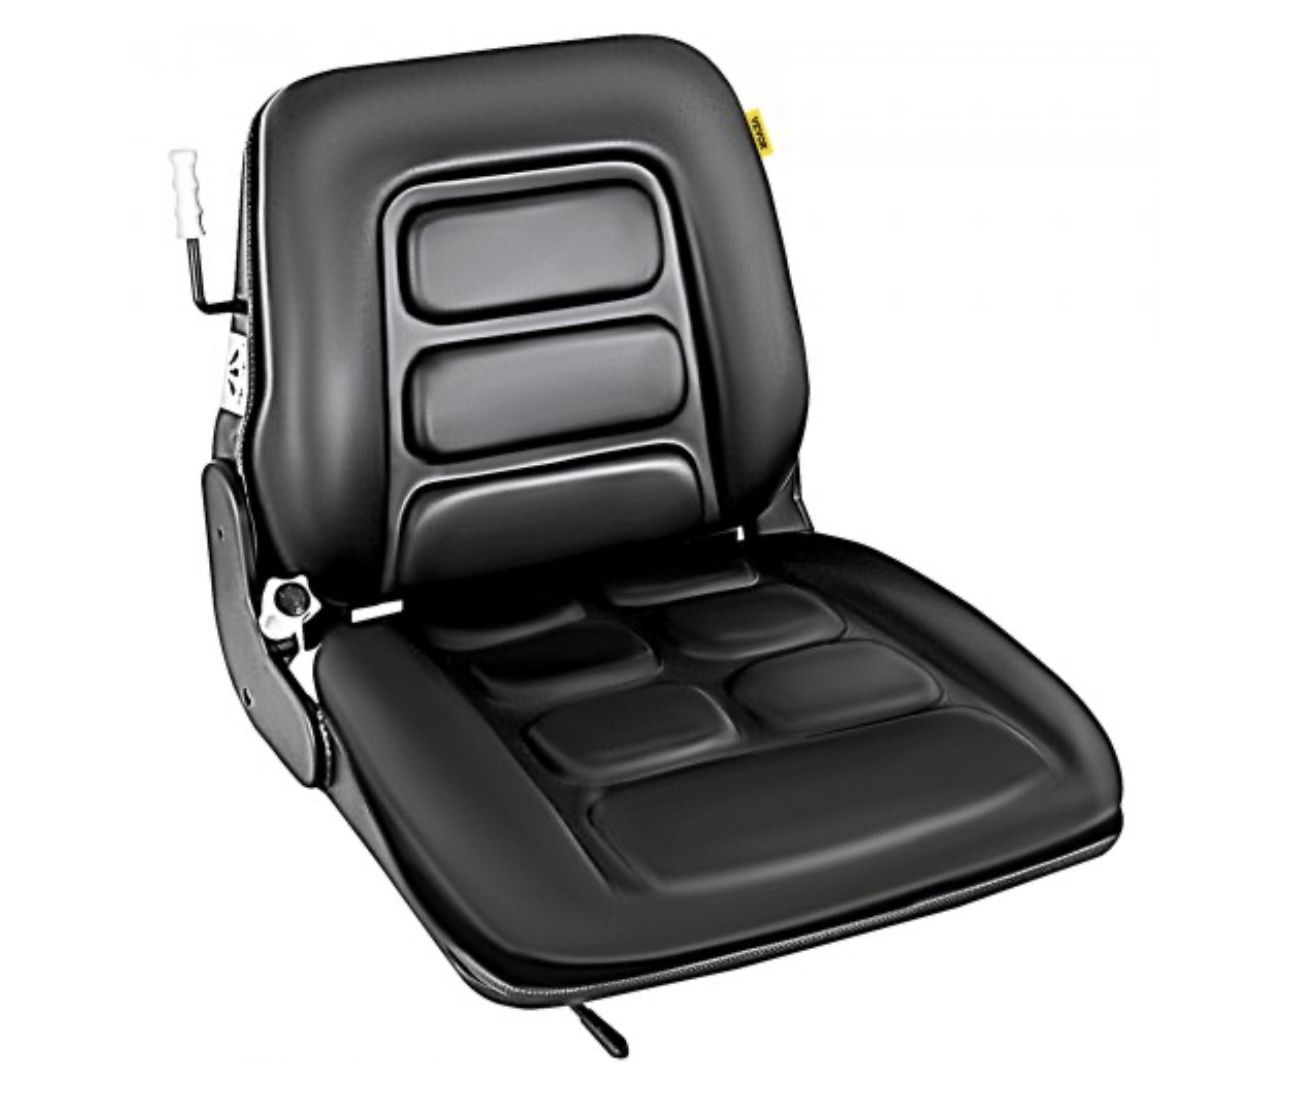 Forklift Seat with 3 Stage Weight Adjustment , Forklift Seat Vinyl Compatible with Toyota, Clark, Cat, Hyster, and Ysle